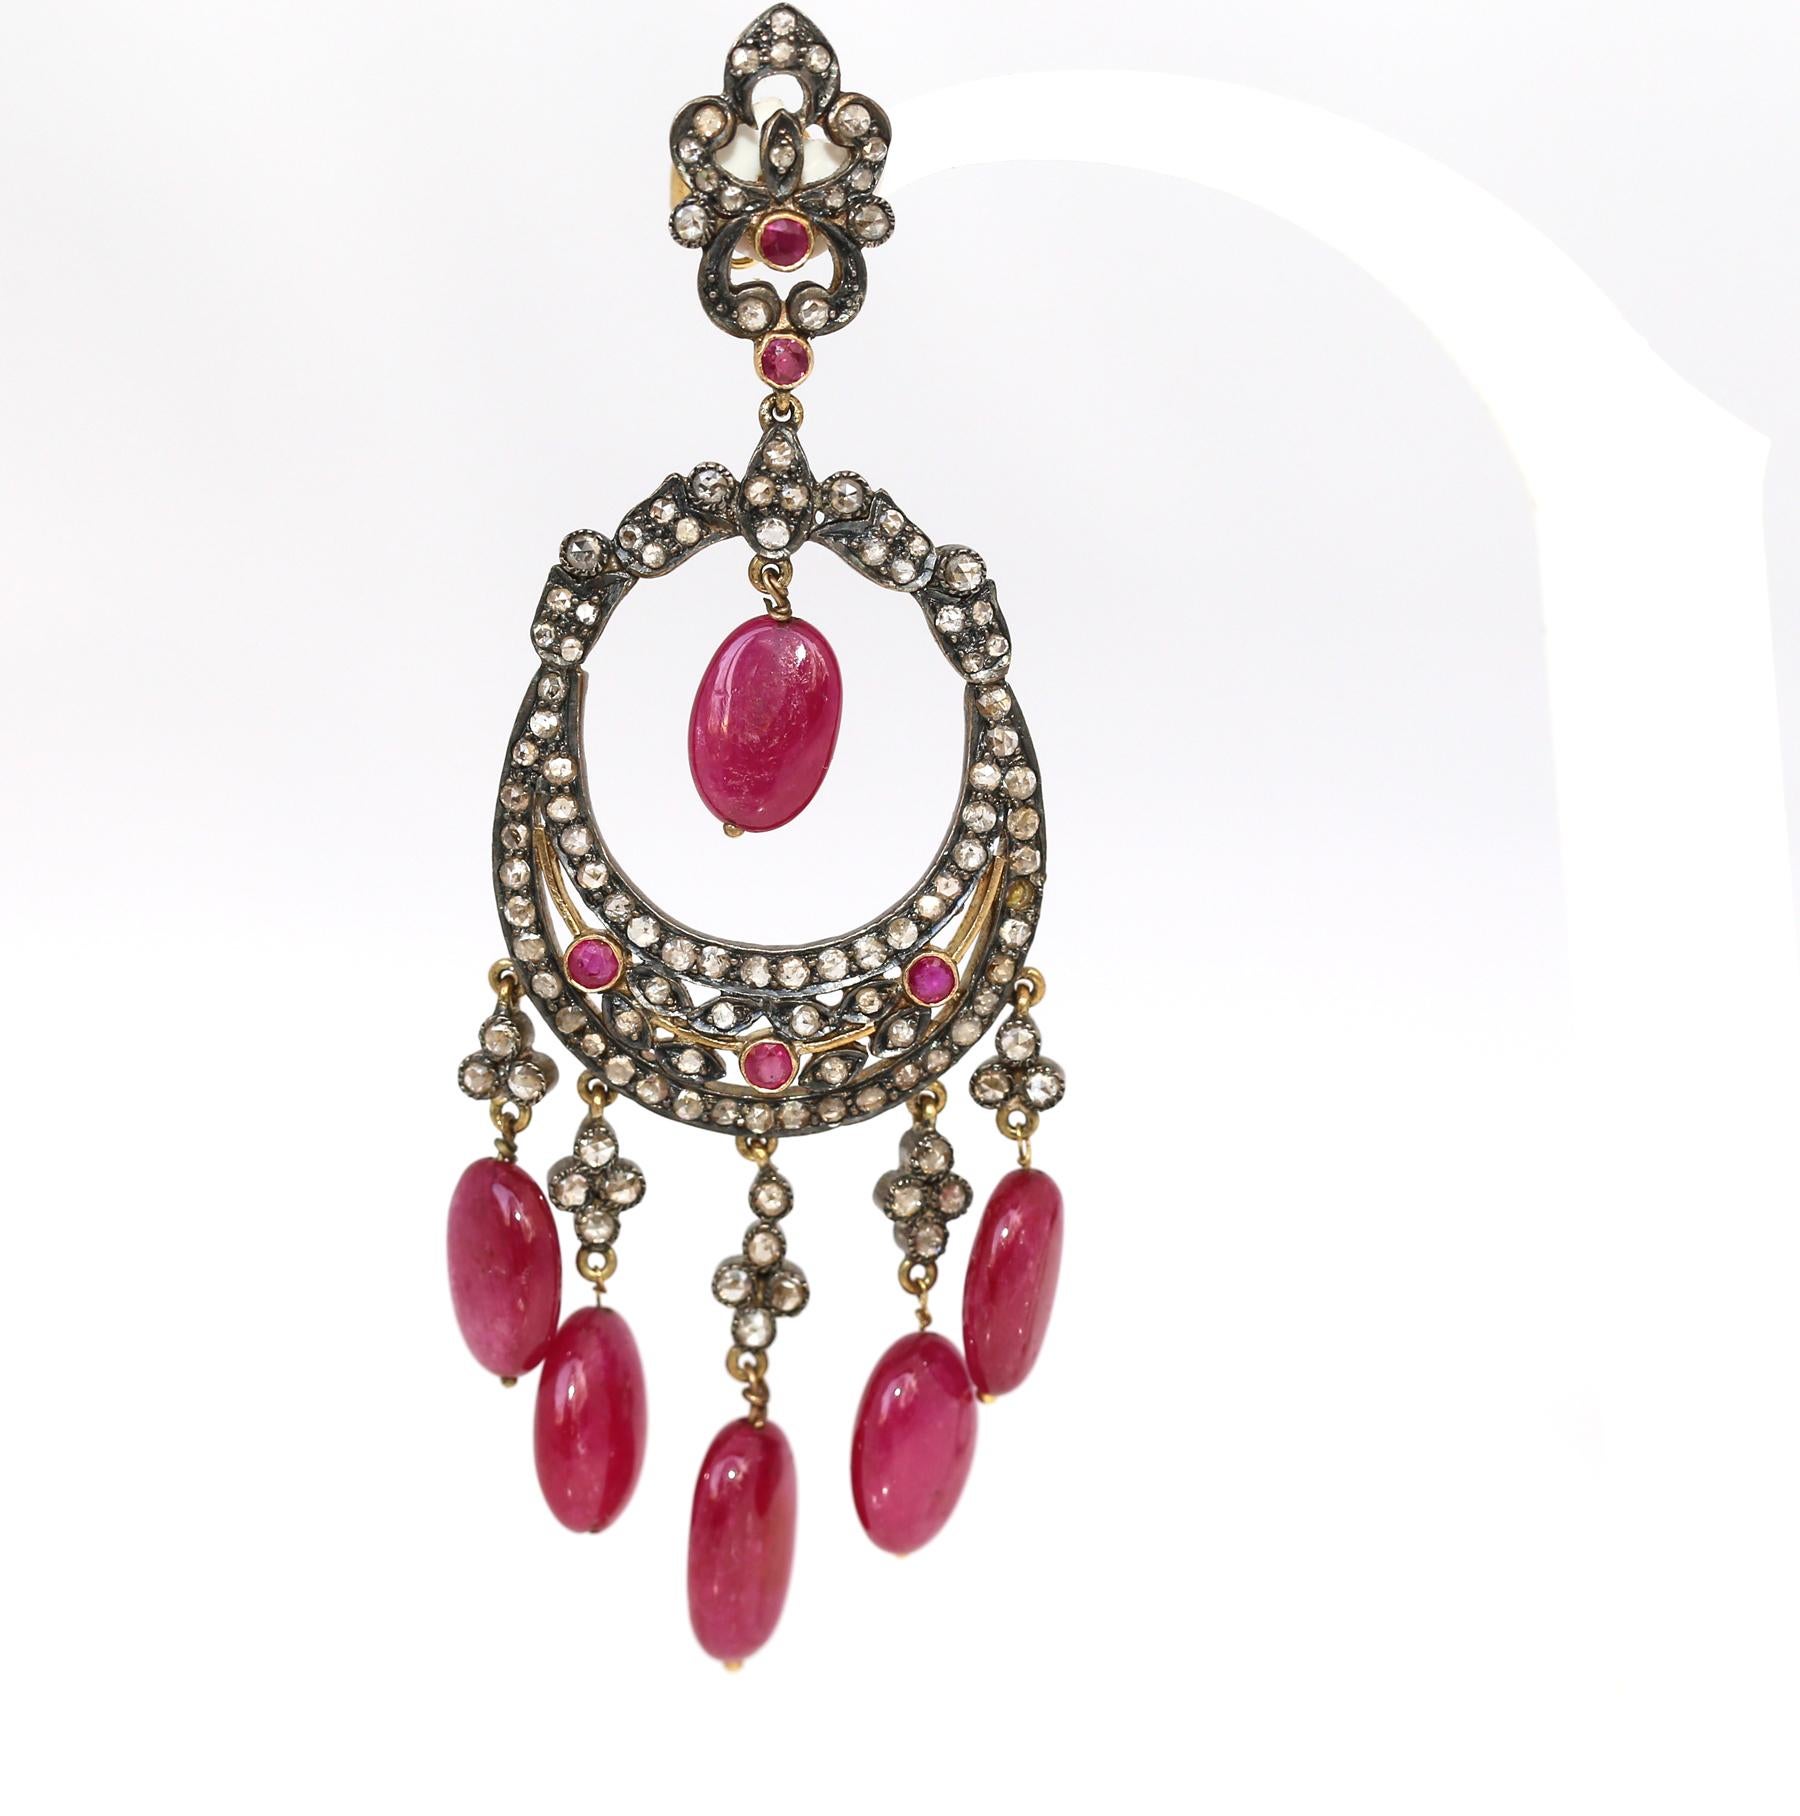 Chandelier Earrings with Indian Rubies Old-cut Diamonds Gold Silver. Bright red to purple stones look great and shiny, attracting attention in any circumstances. 

Fine earrings from the period of time when the whole world turned to Indian culture -